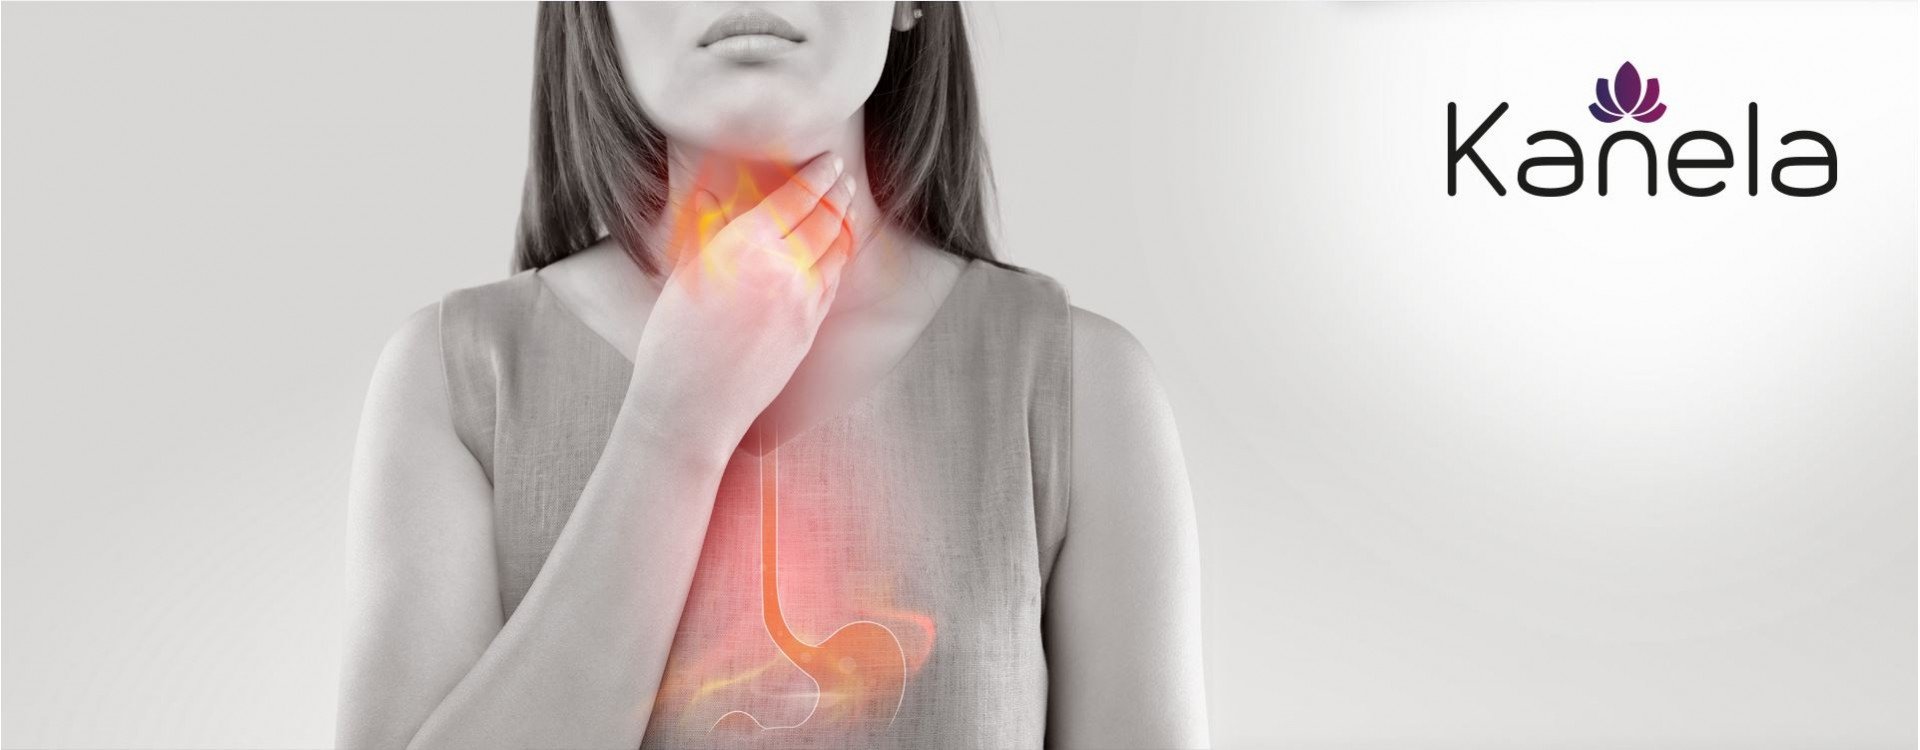 What can be done about reflux?